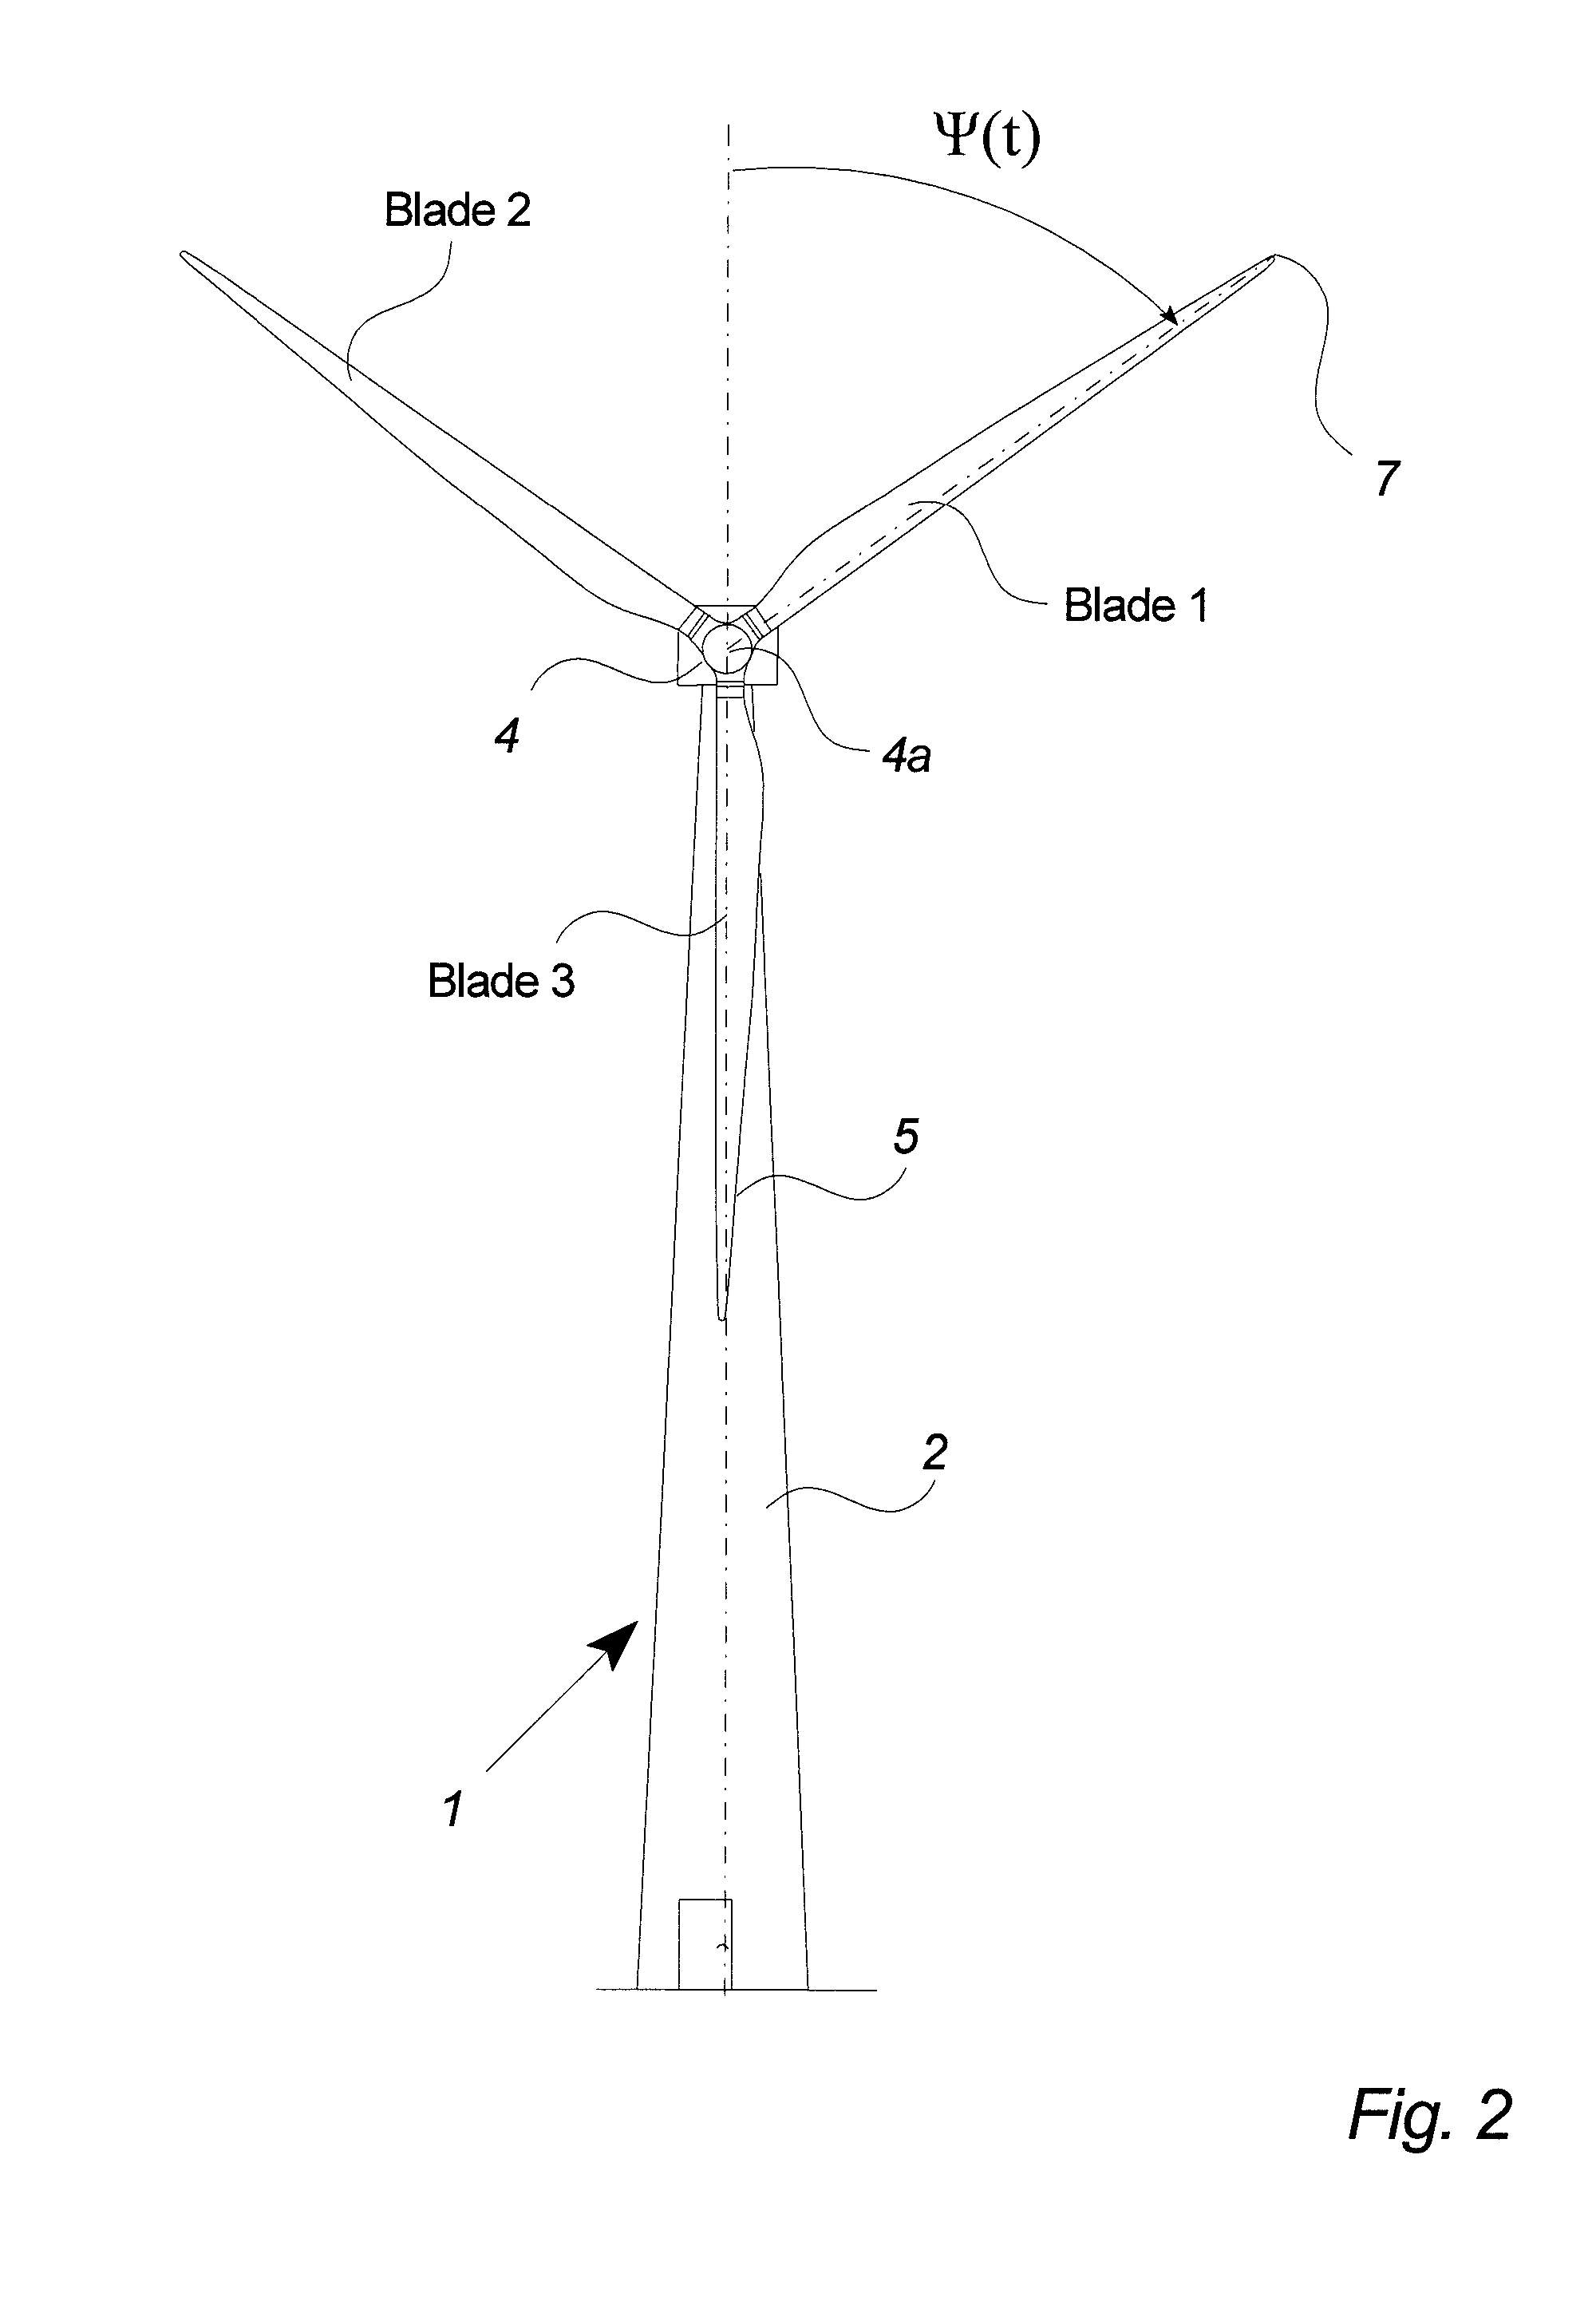 Method And Control System For Reducing The Fatigue Loads In The Components Of A Wind Turbine Subjected to Asymmetrical Loading Of The Rotor Plane